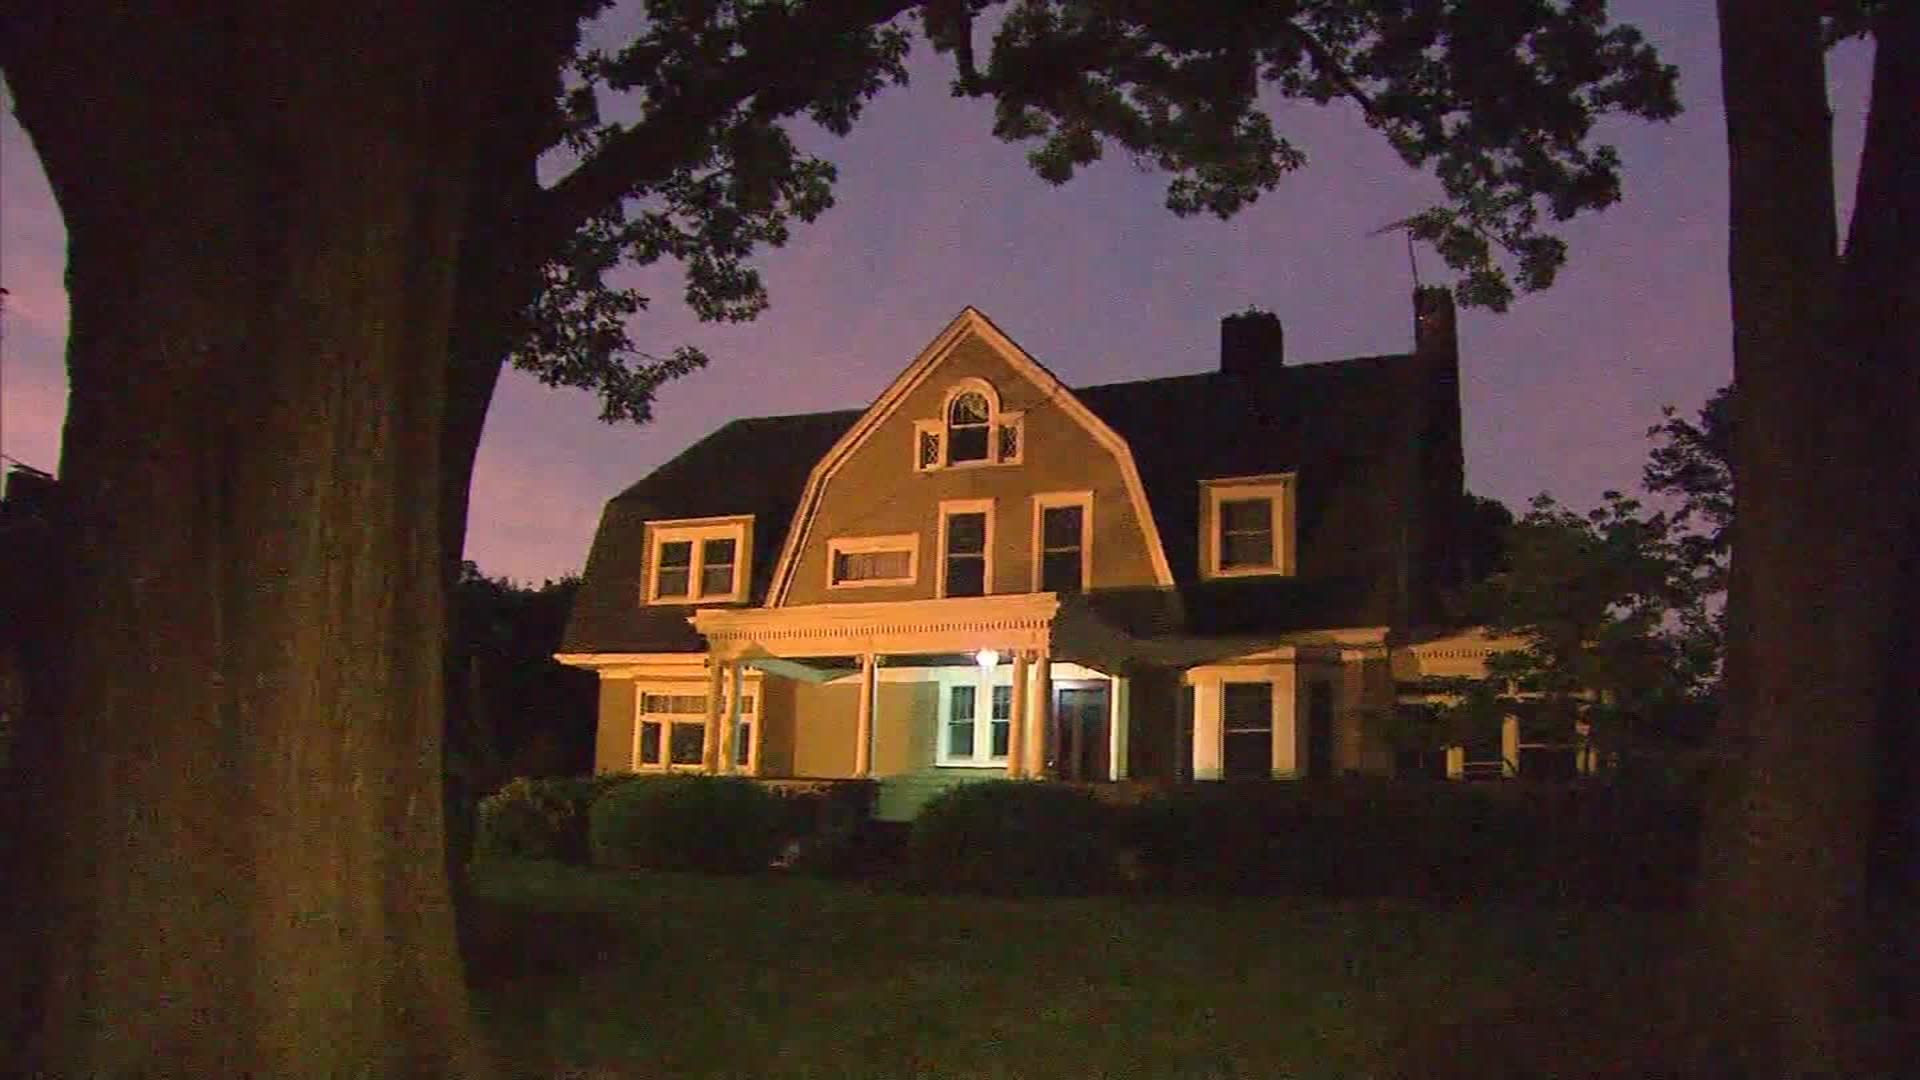 Is 'The Watcher' House Real? The True Story of 657 Boulevard